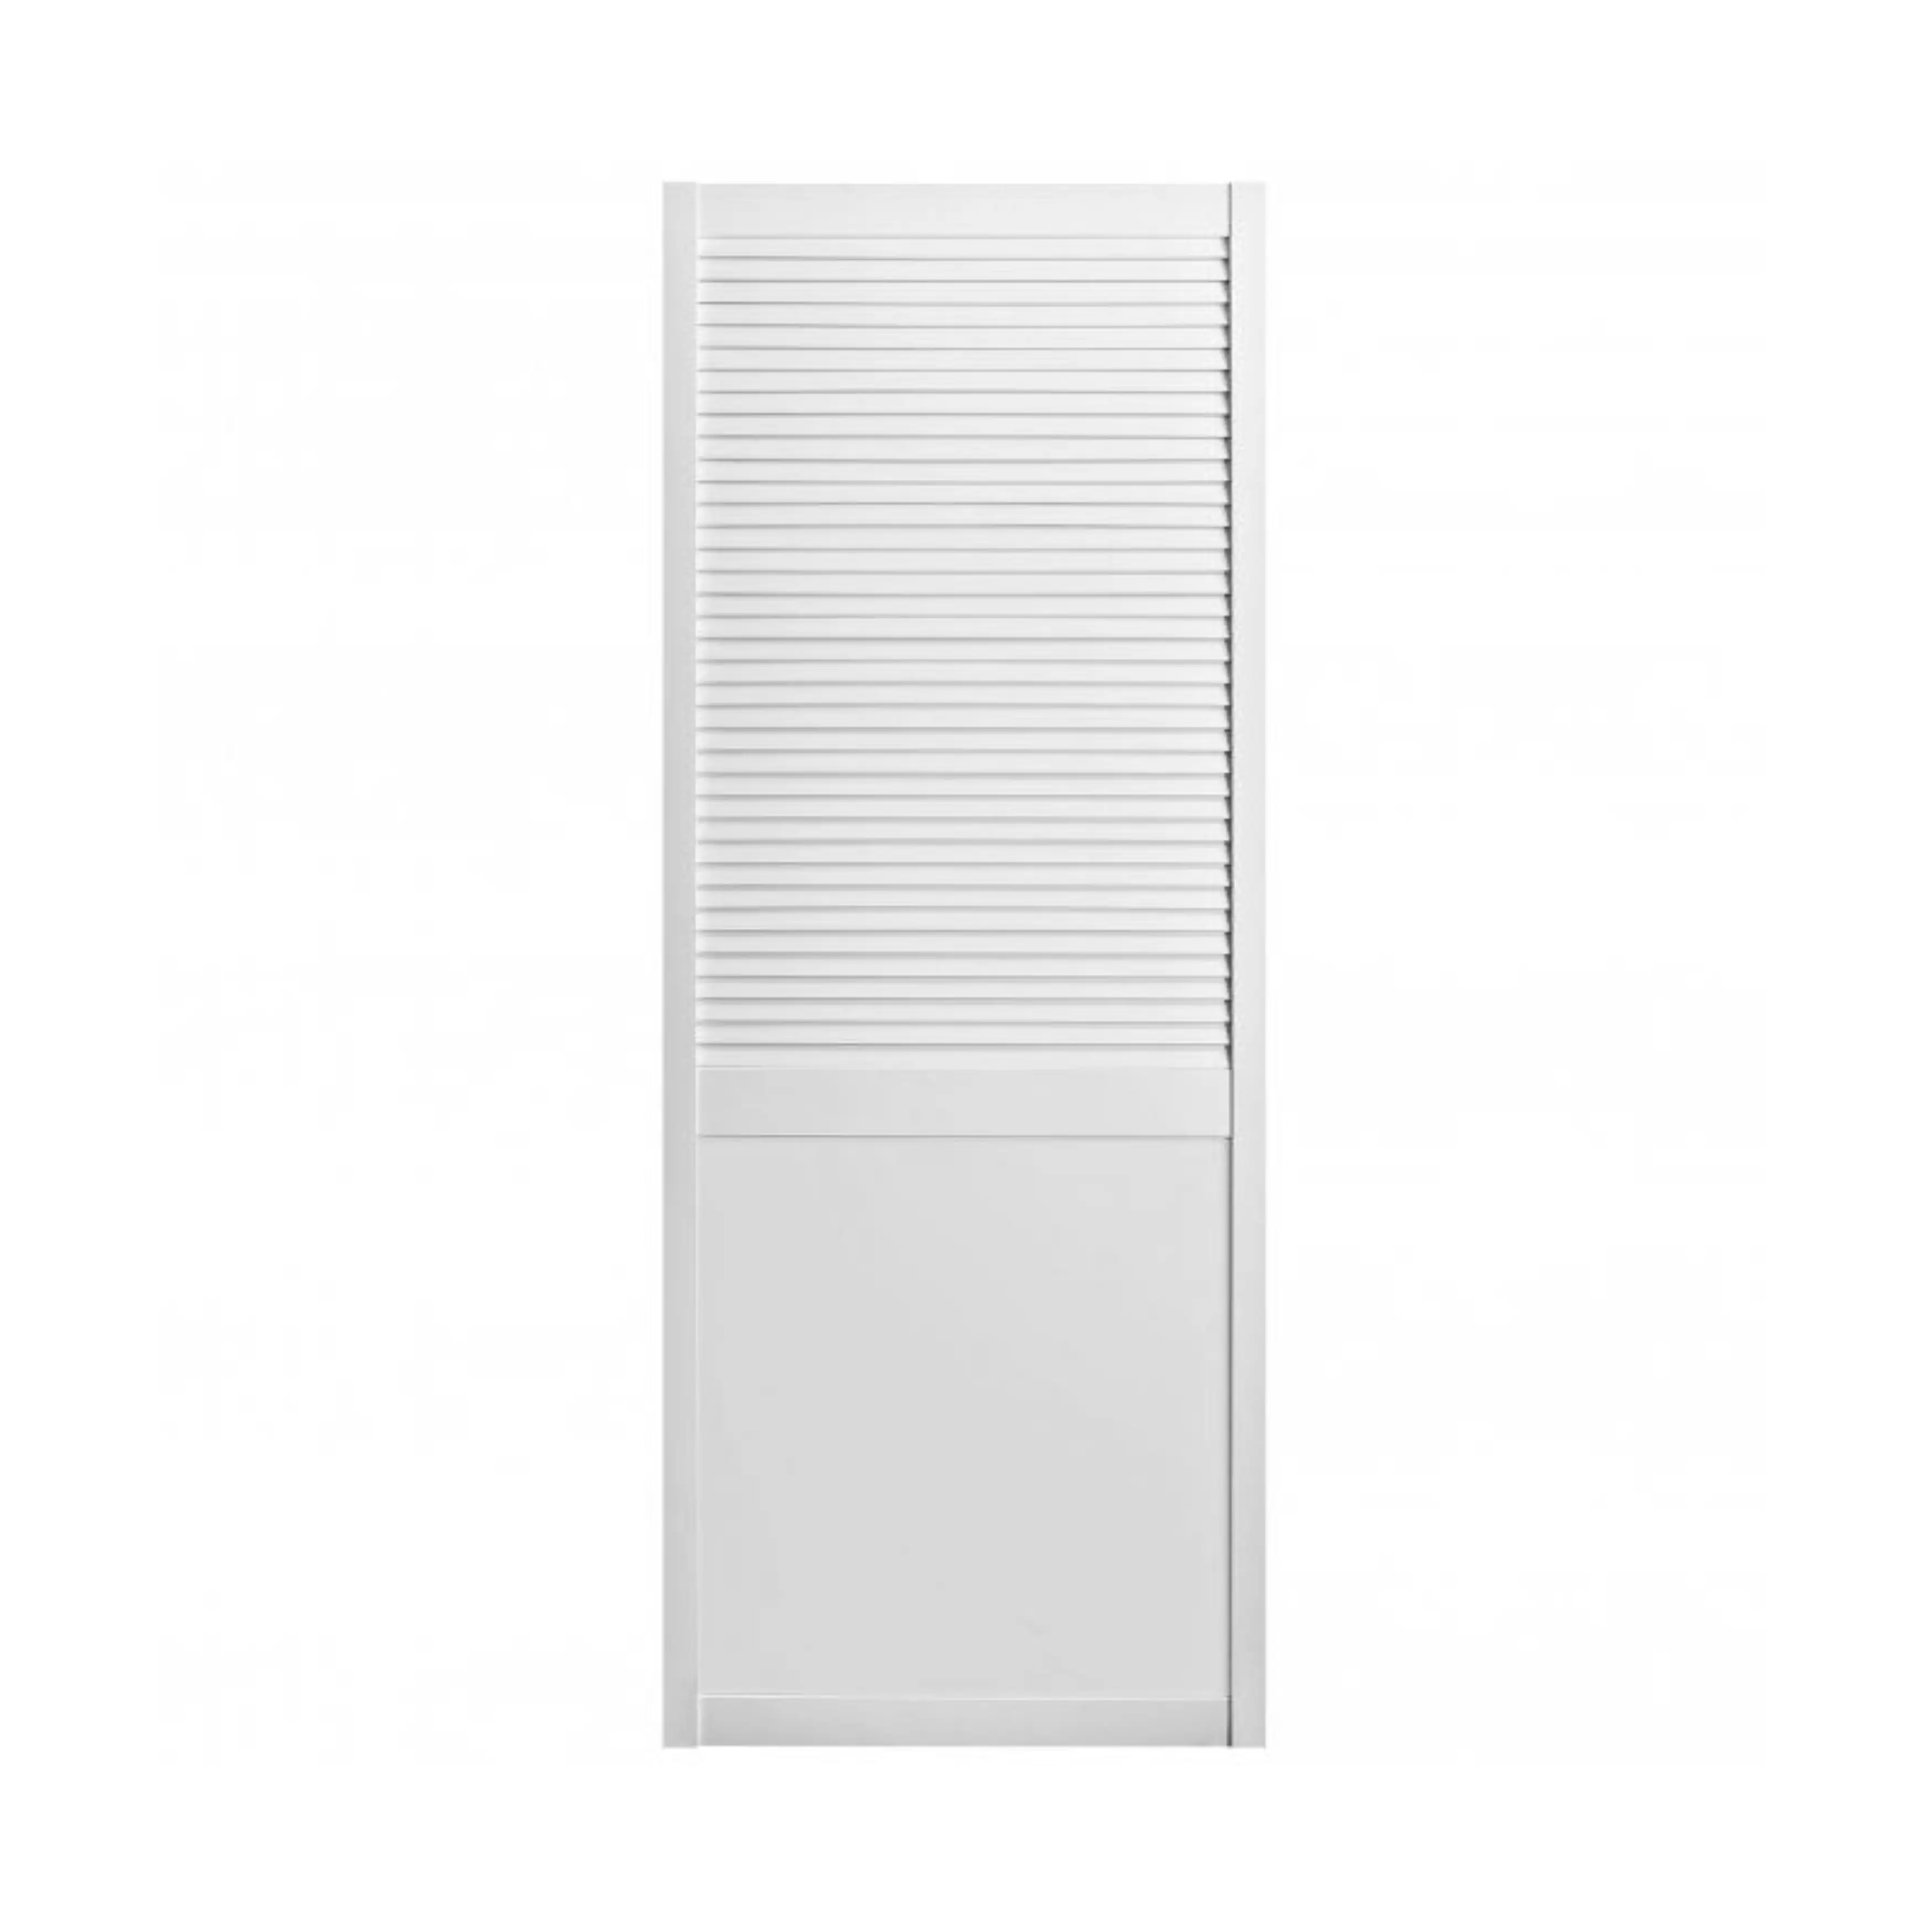 acoustic guitar solid wood Prehung Panel White Primed 2-panel MDF Louver Doors Interior Doors for Houses